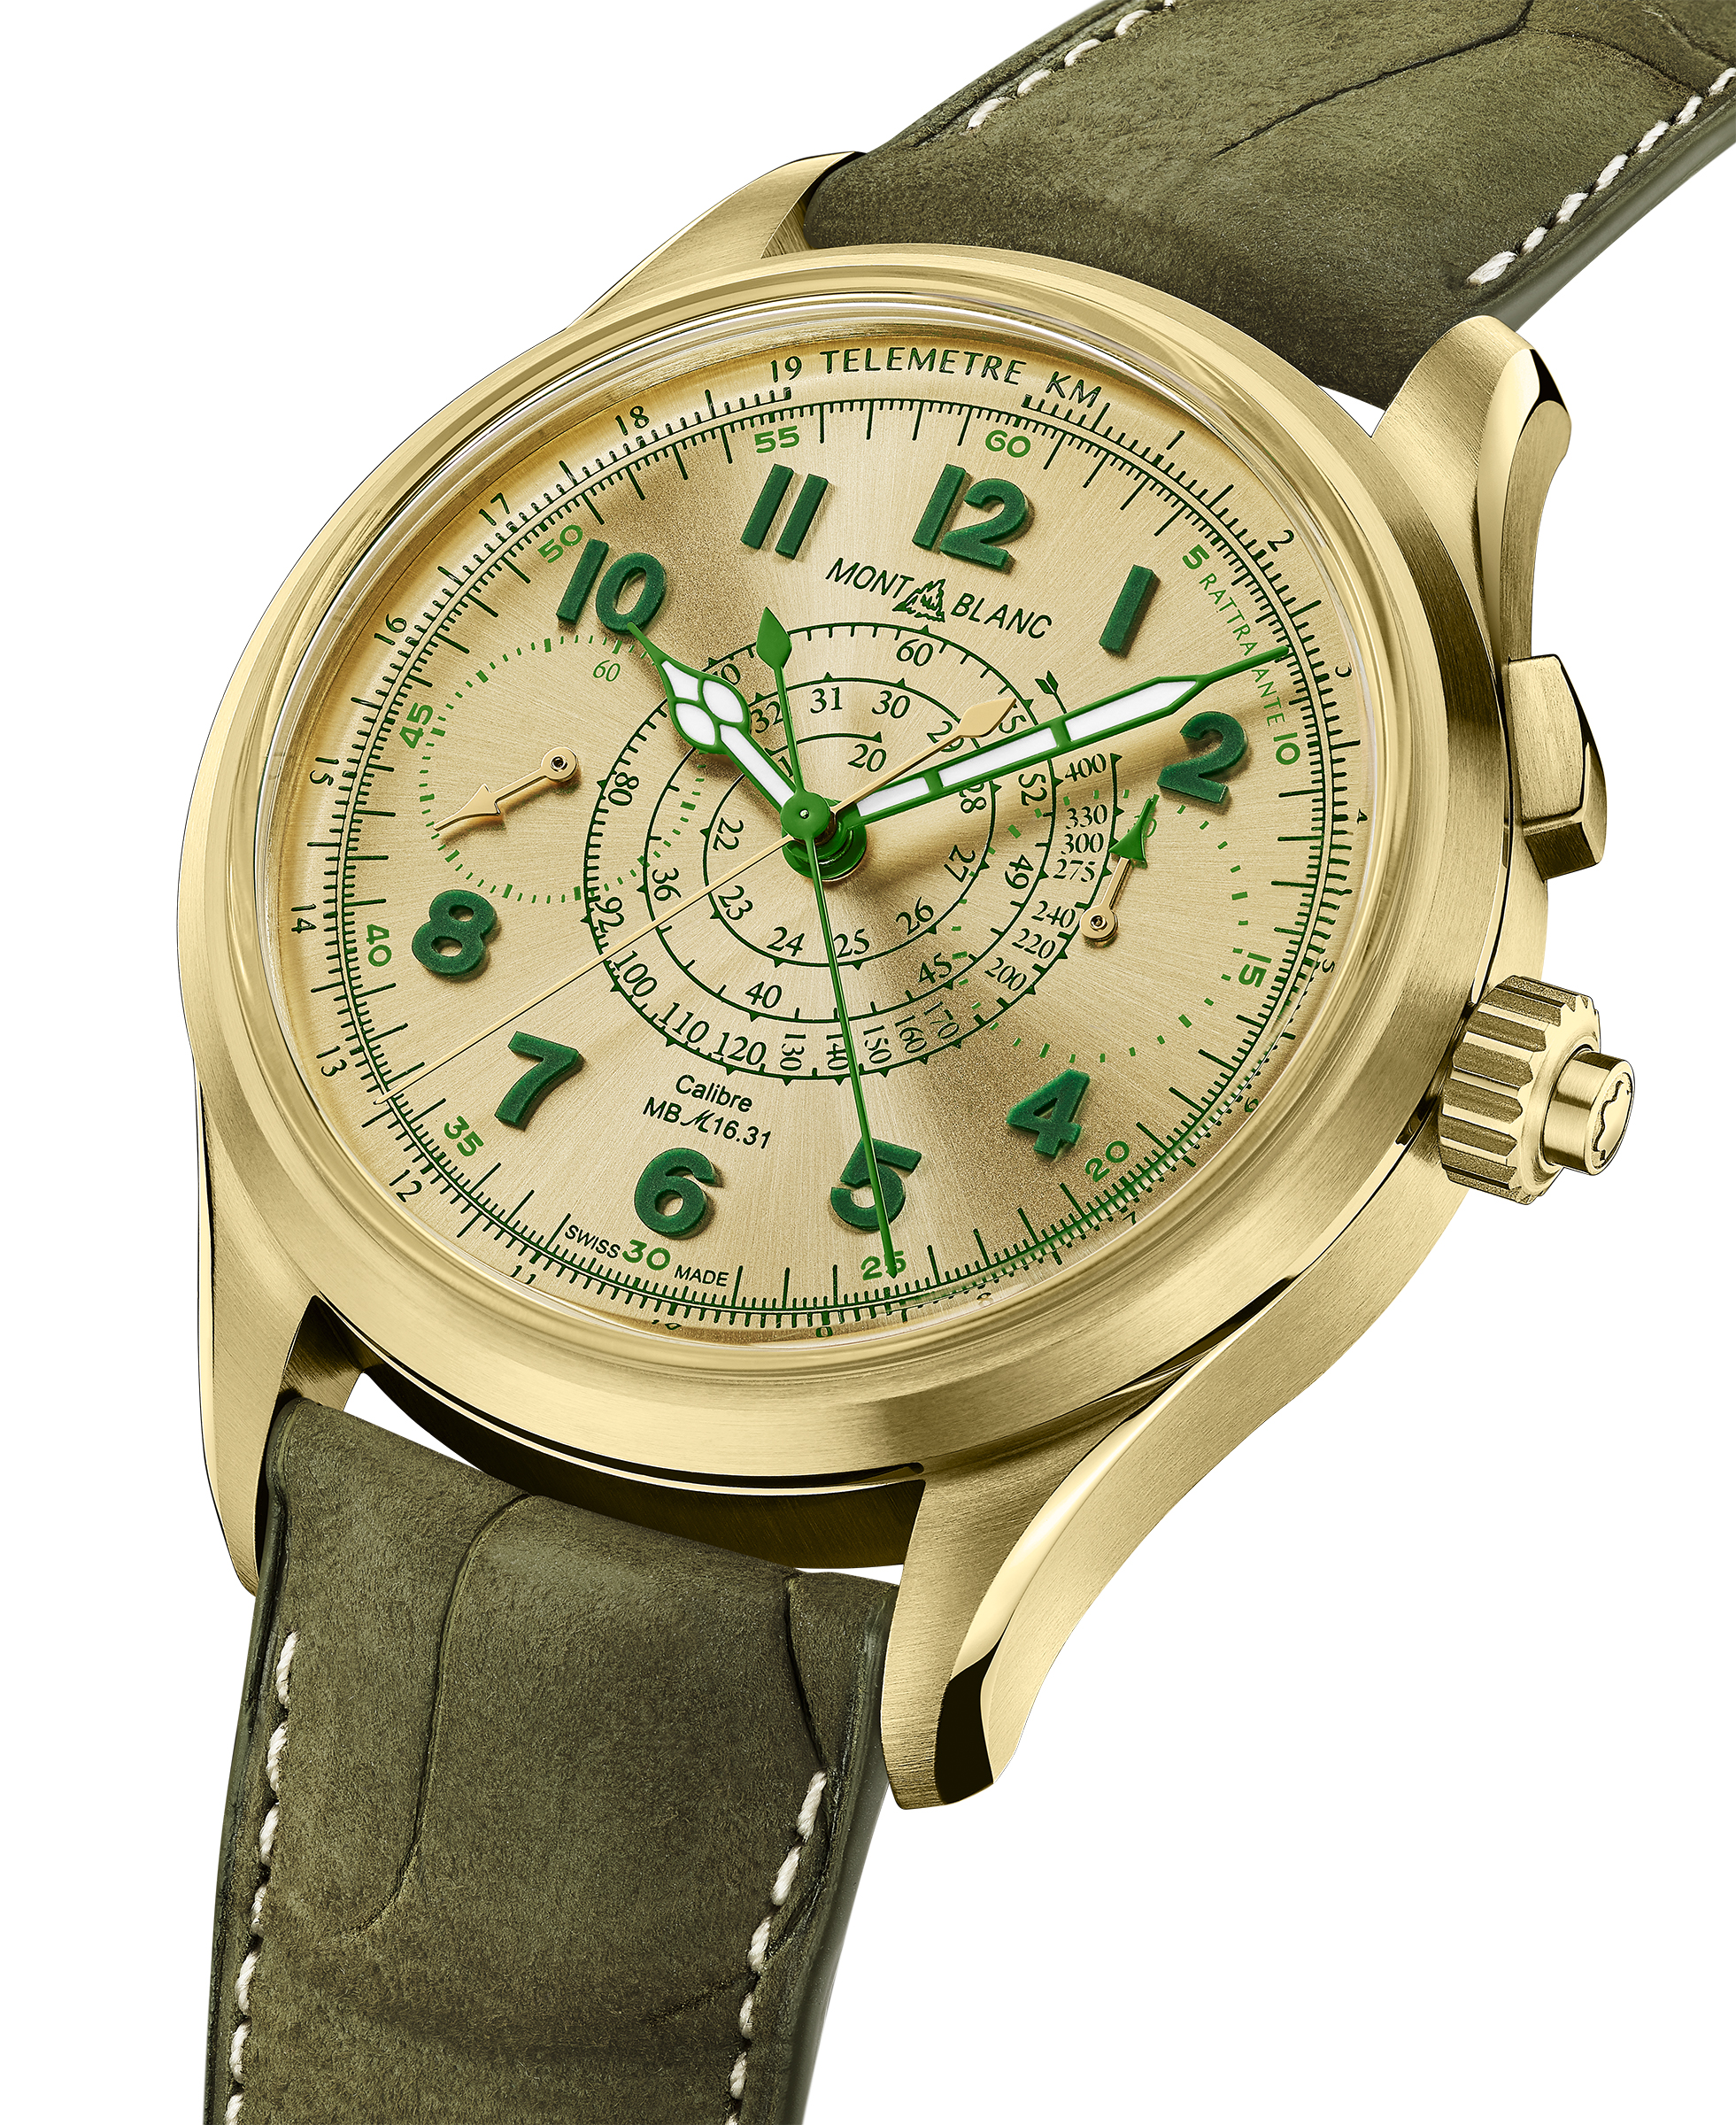 One of a Kind: Six Watches Made From Proprietary Gold Alloys